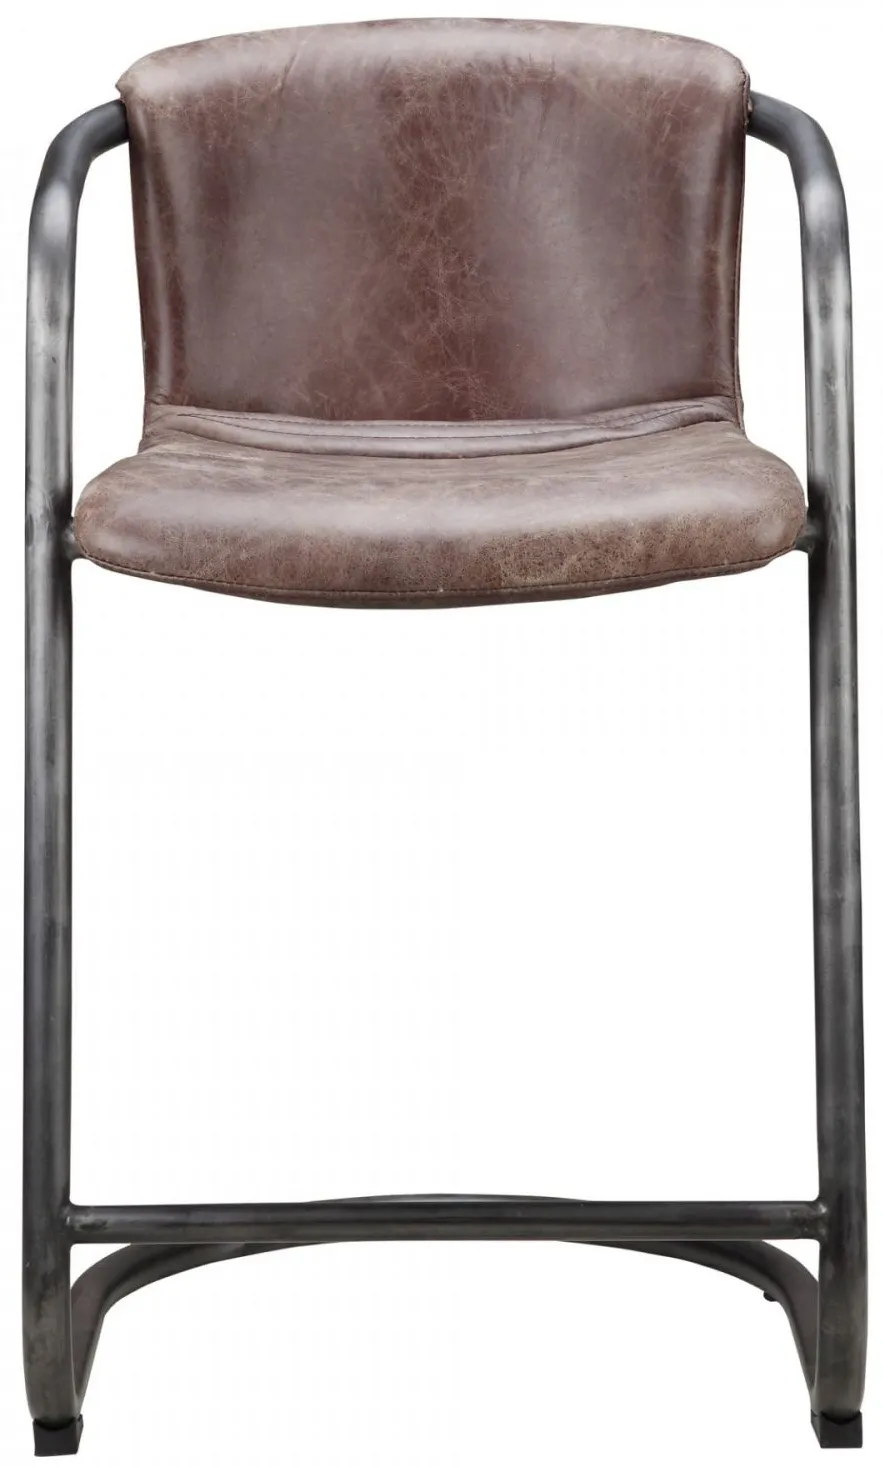 Freeman Counter Stool Grazed Brown Leather, Set of 2